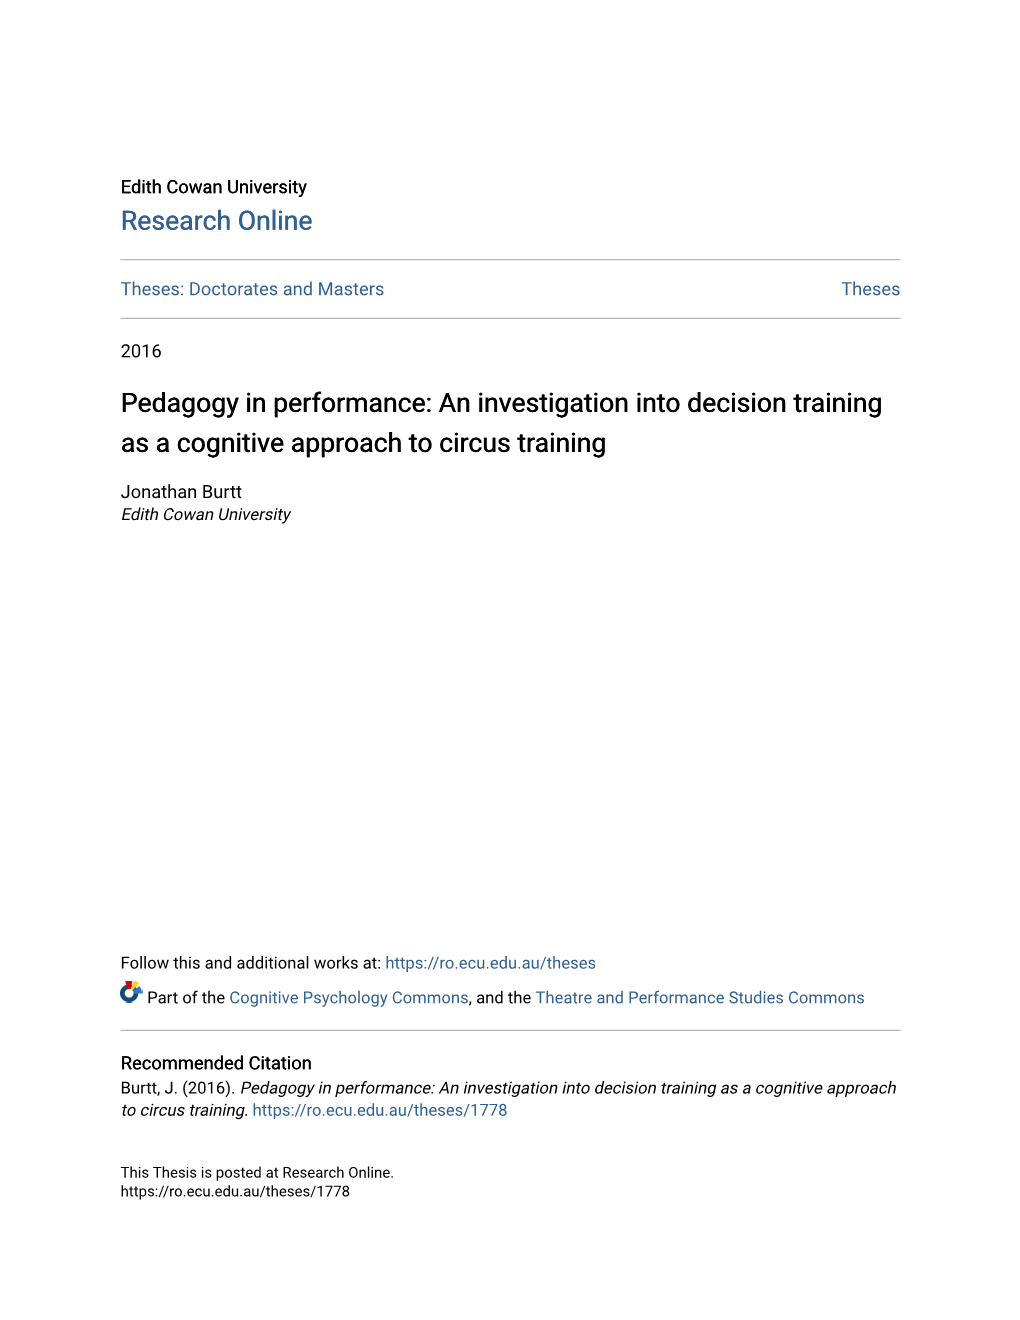 An Investigation Into Decision Training As a Cognitive Approach to Circus Training